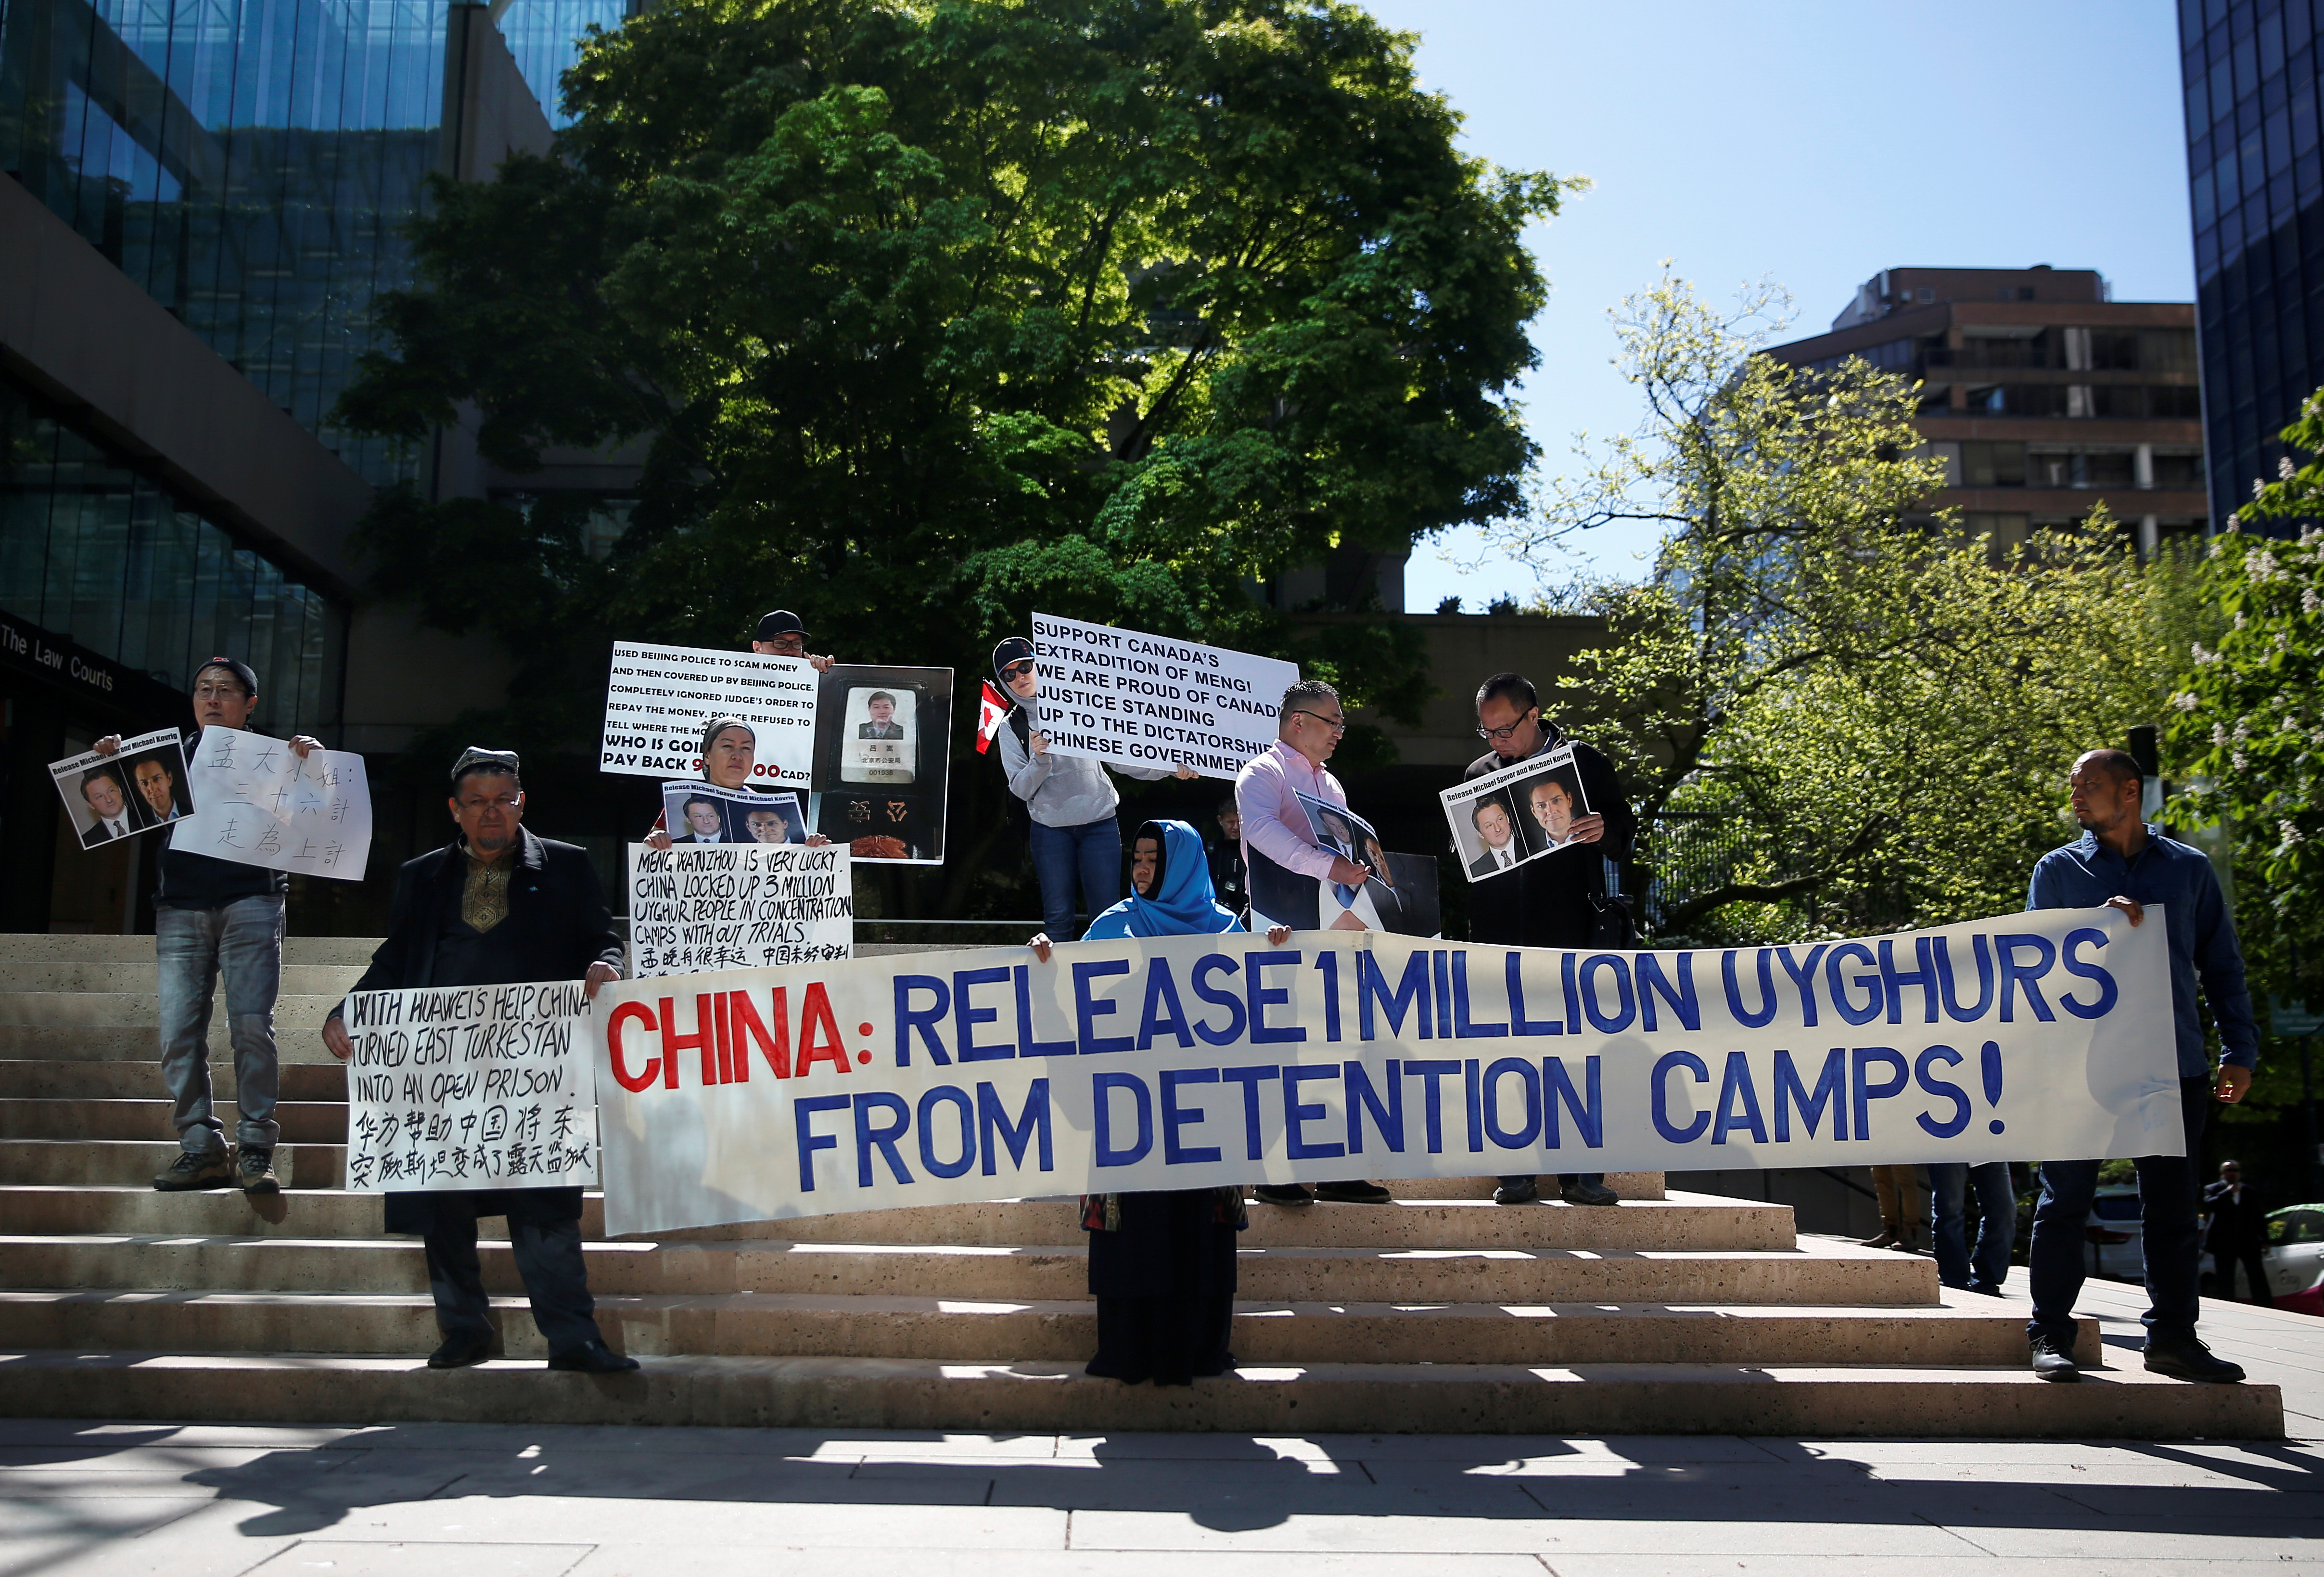 People hold signs protesting China's treatment of the Uighur people during a court appearance by Huawei's Financial Chief Meng Wanzhou, outside of British Columbia Supreme Court building in Vancouver, British Columbia, Canada, May 8, 2019. REUTERS/Lindsey Wasson